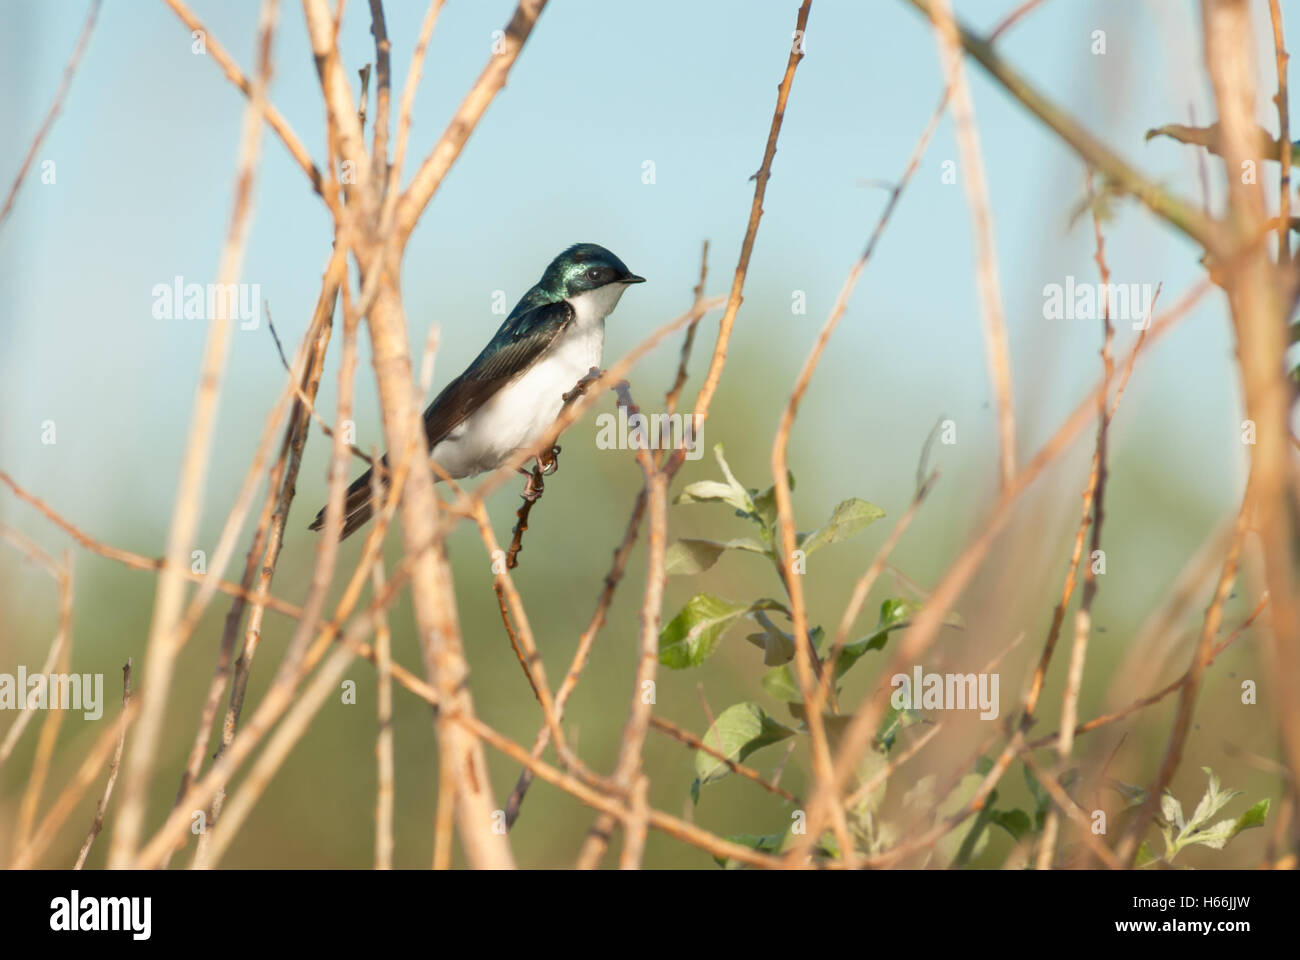 A solitary tree swallow, Tachycineta bicolor, perched on a willow branch in the Lois Hole Provincial Park, Alberta, Canada Stock Photo